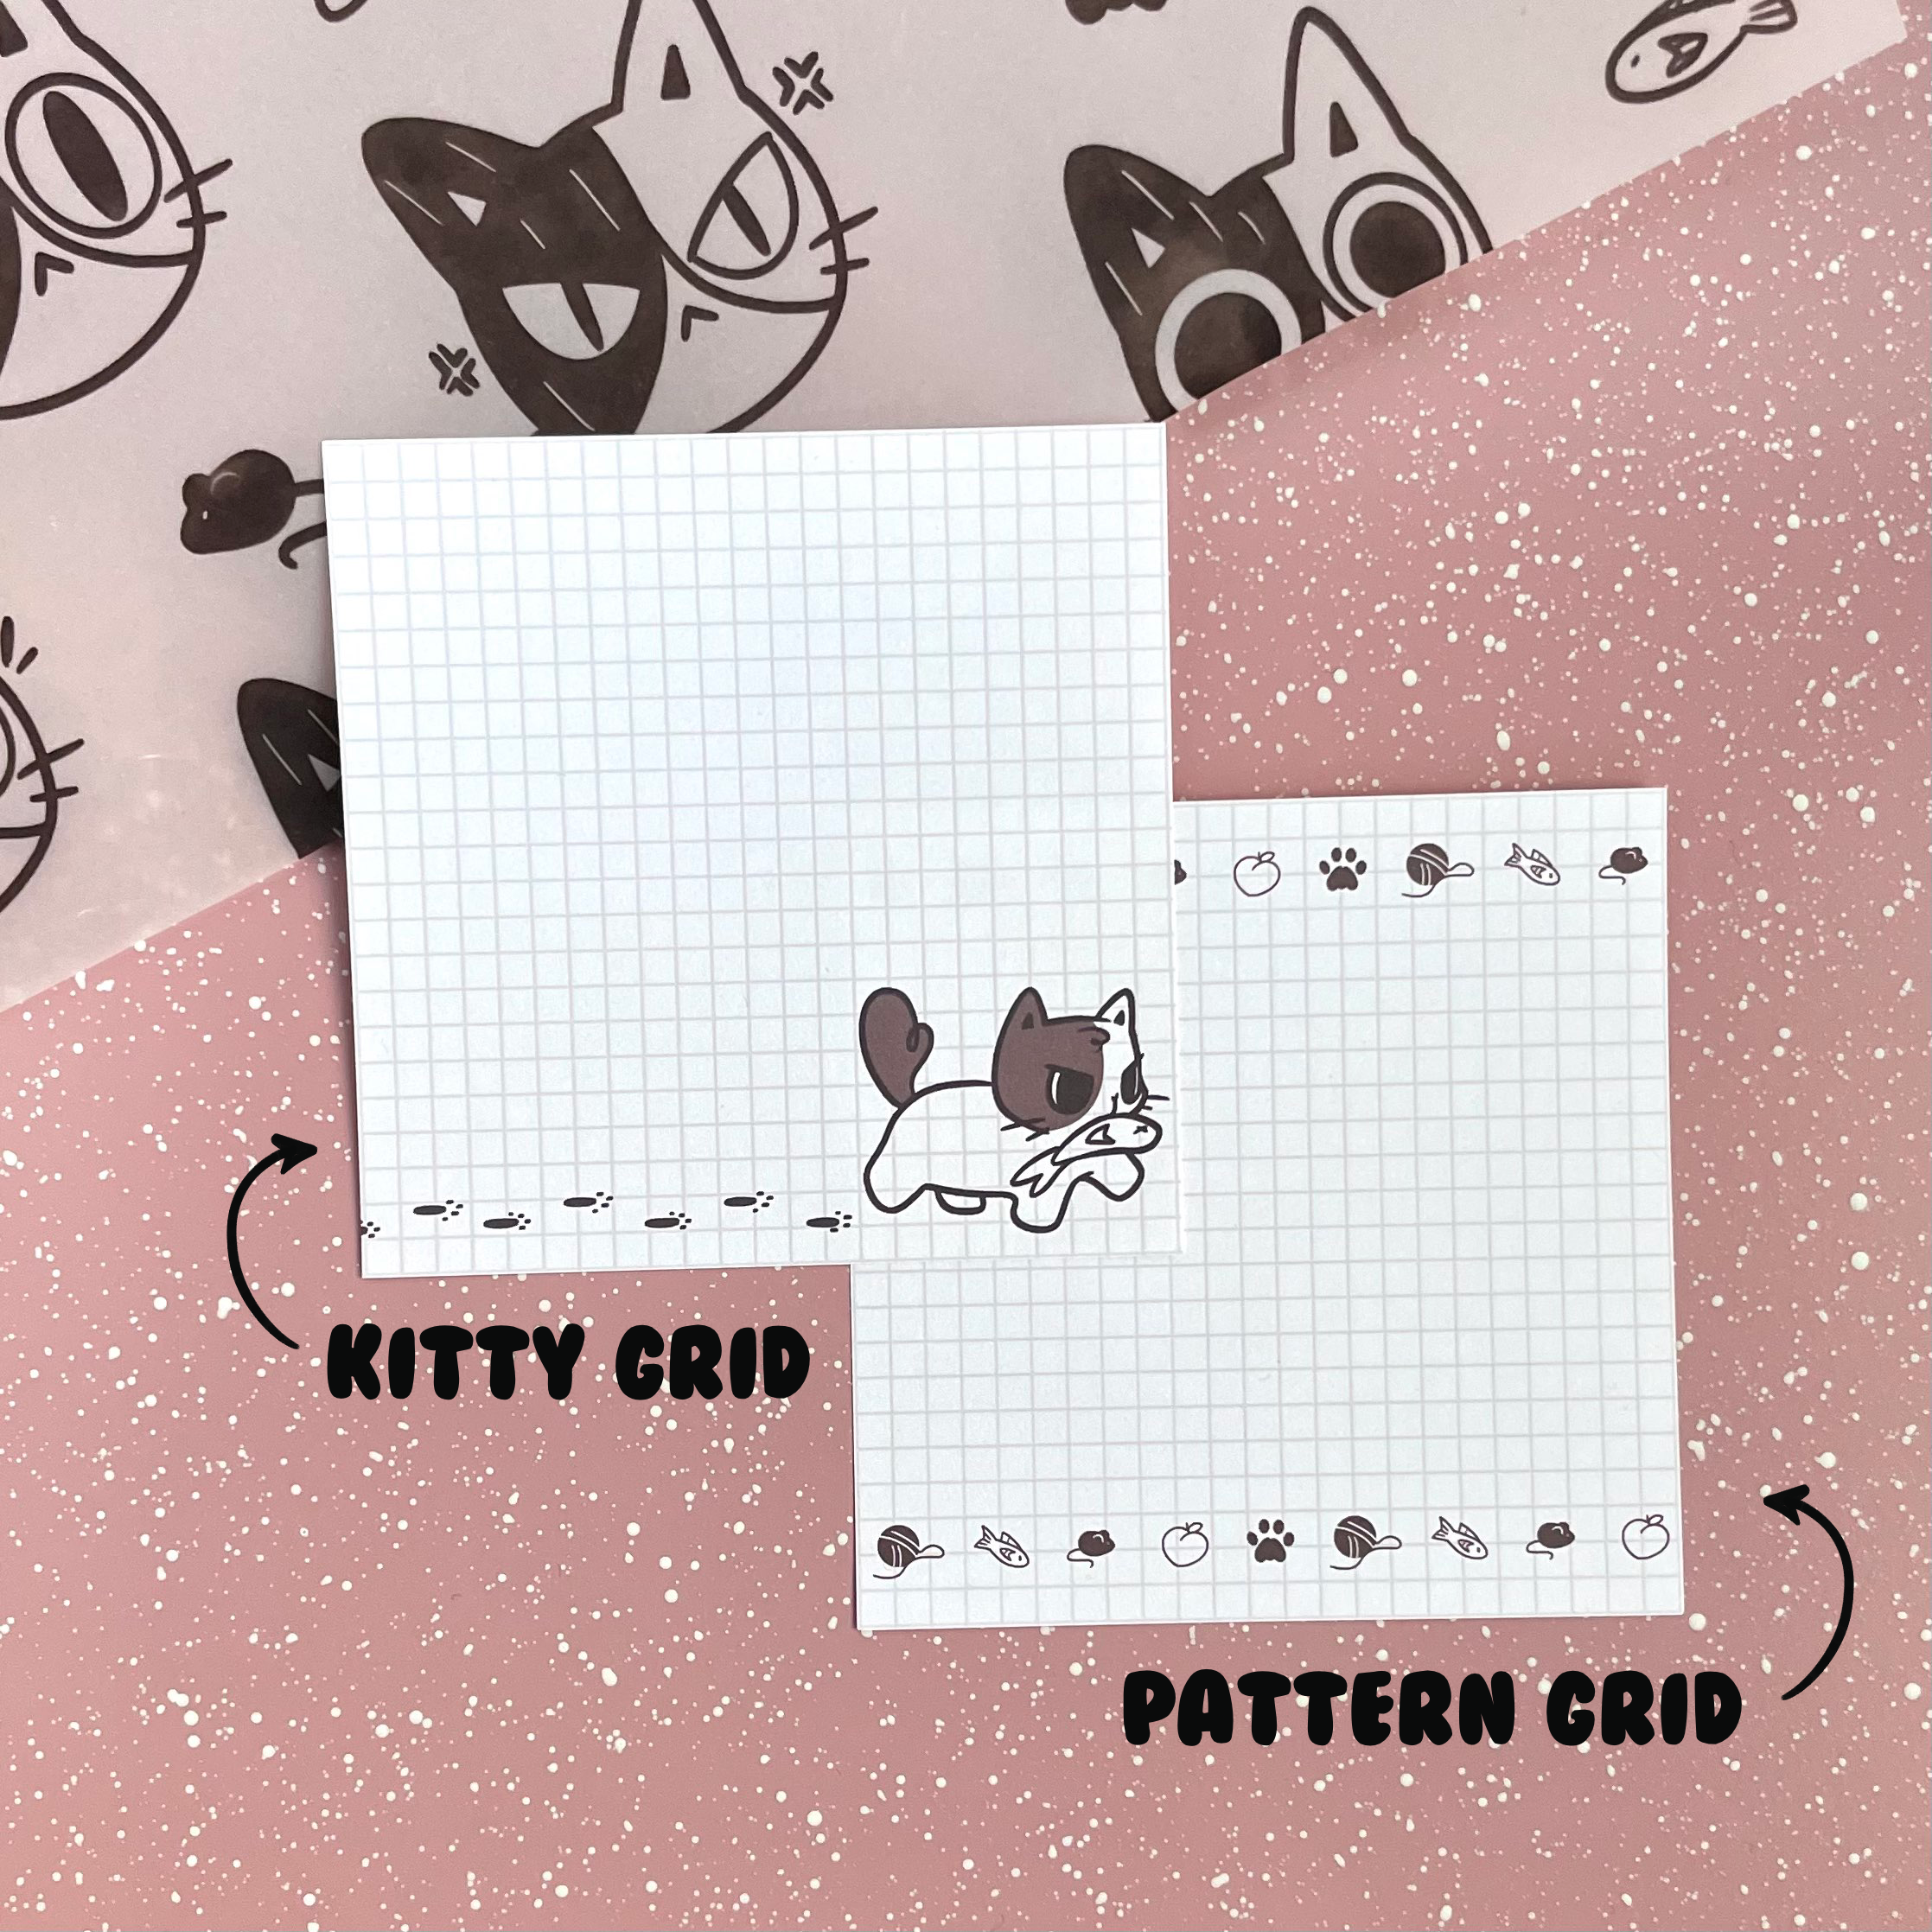 CAT THEMED MEMO PADS, 50 SHEETS